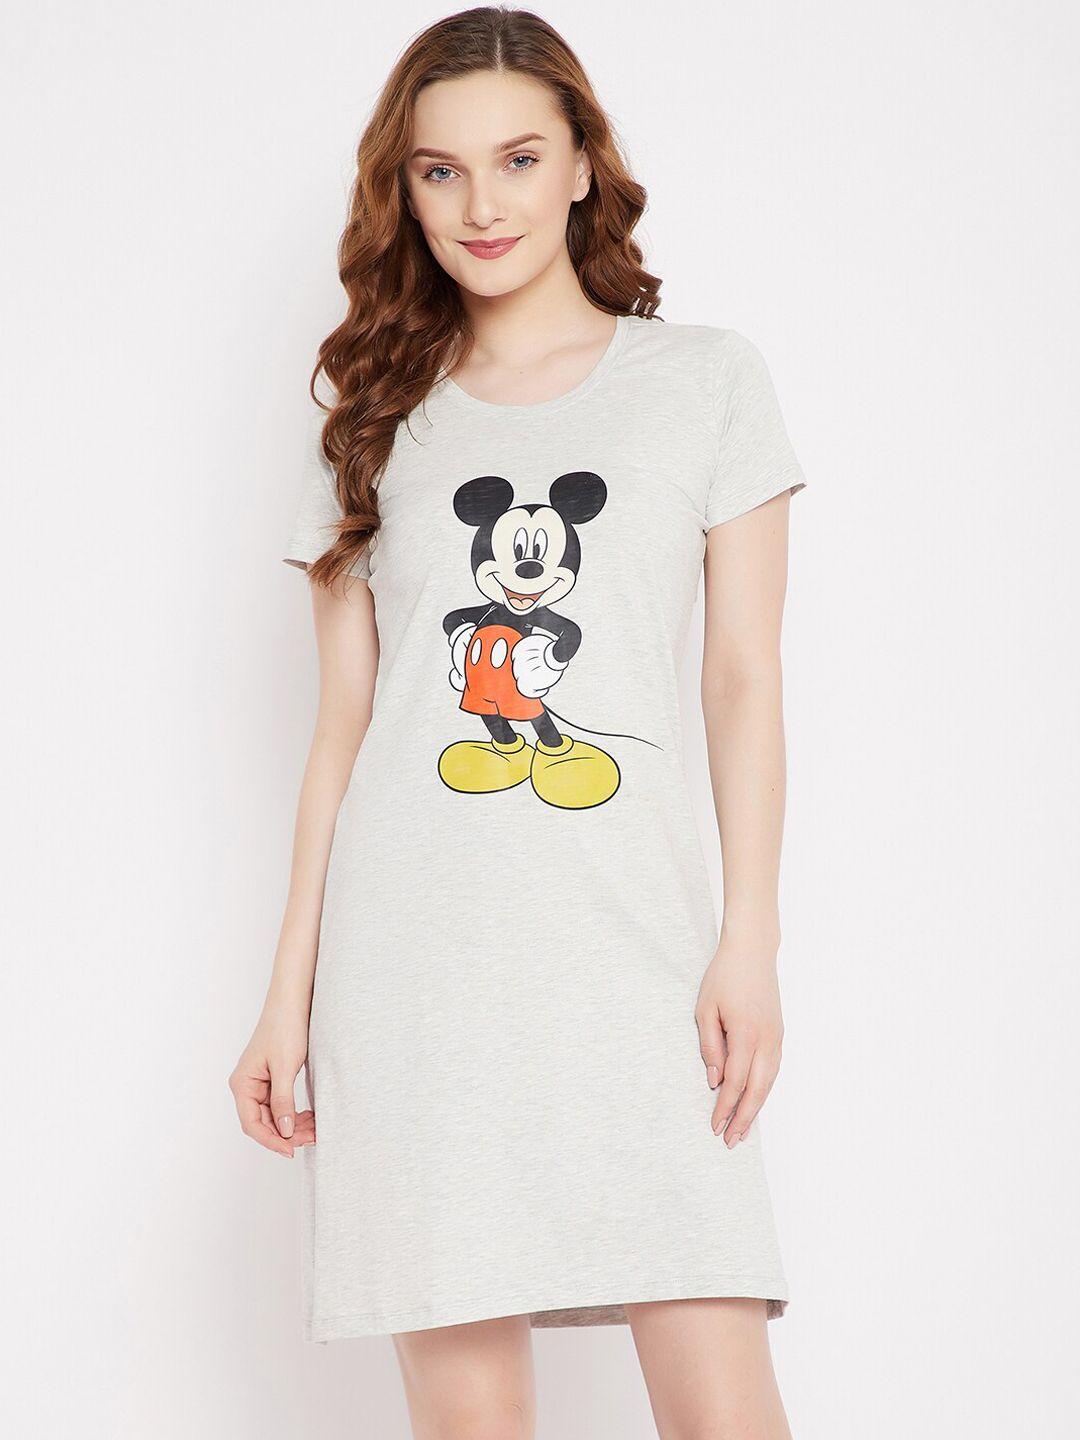 disney by wear your mind women grey & yellow mickey mouse family printed pure cotton sleep shirt